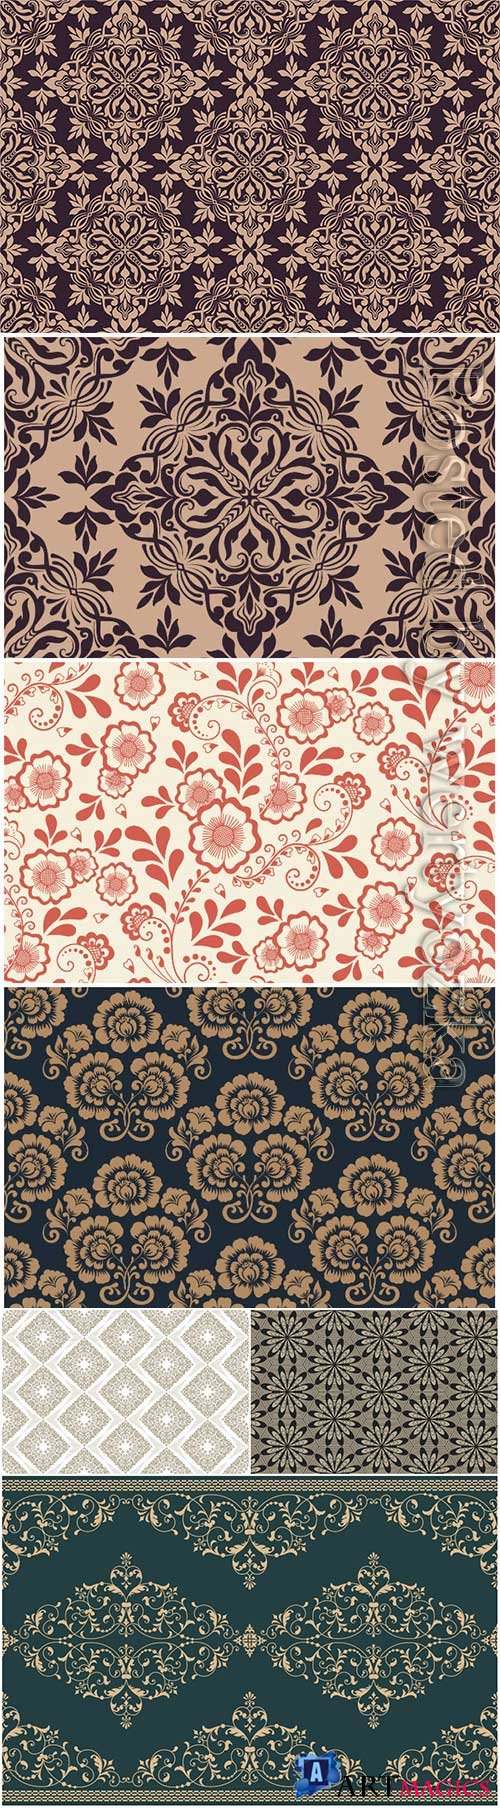 Vector floral seamless pattern element arabian style